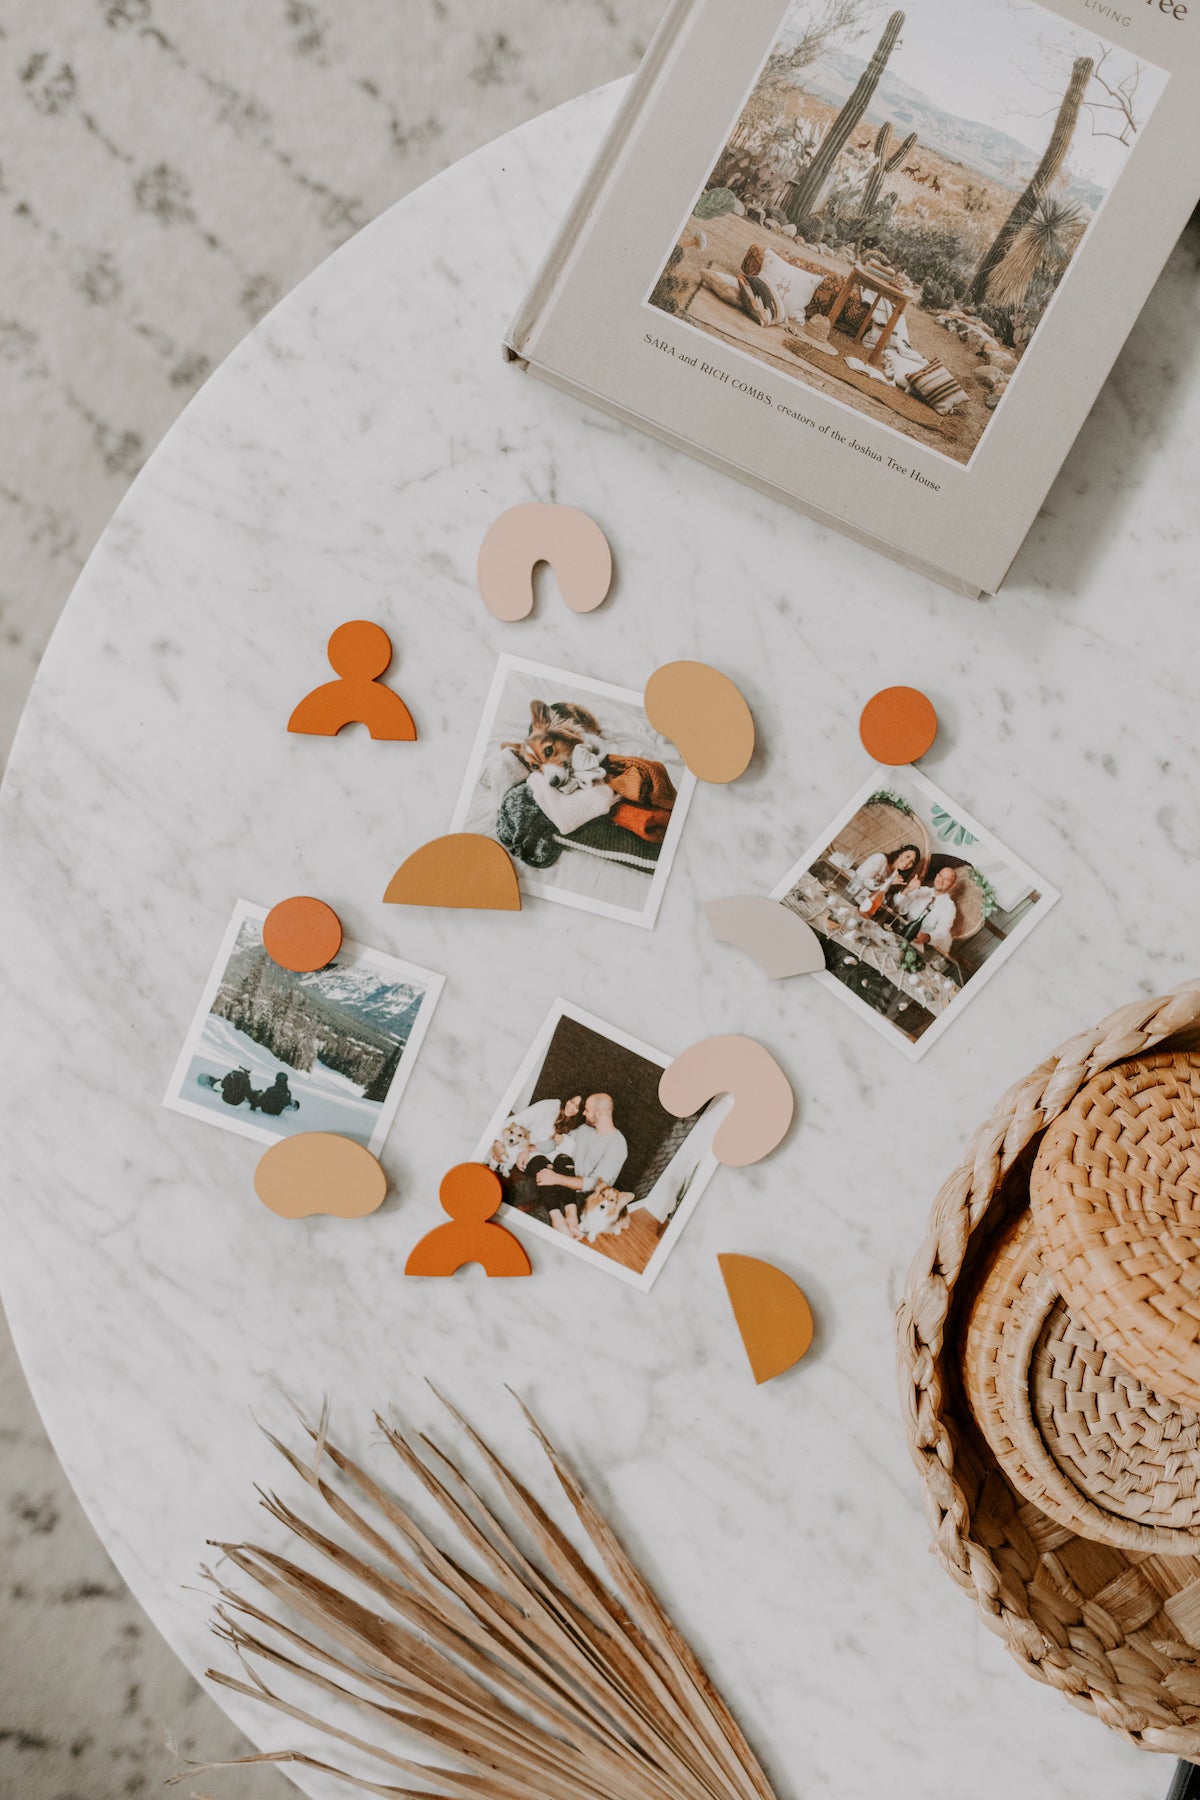 Assortment of photos on a marble table